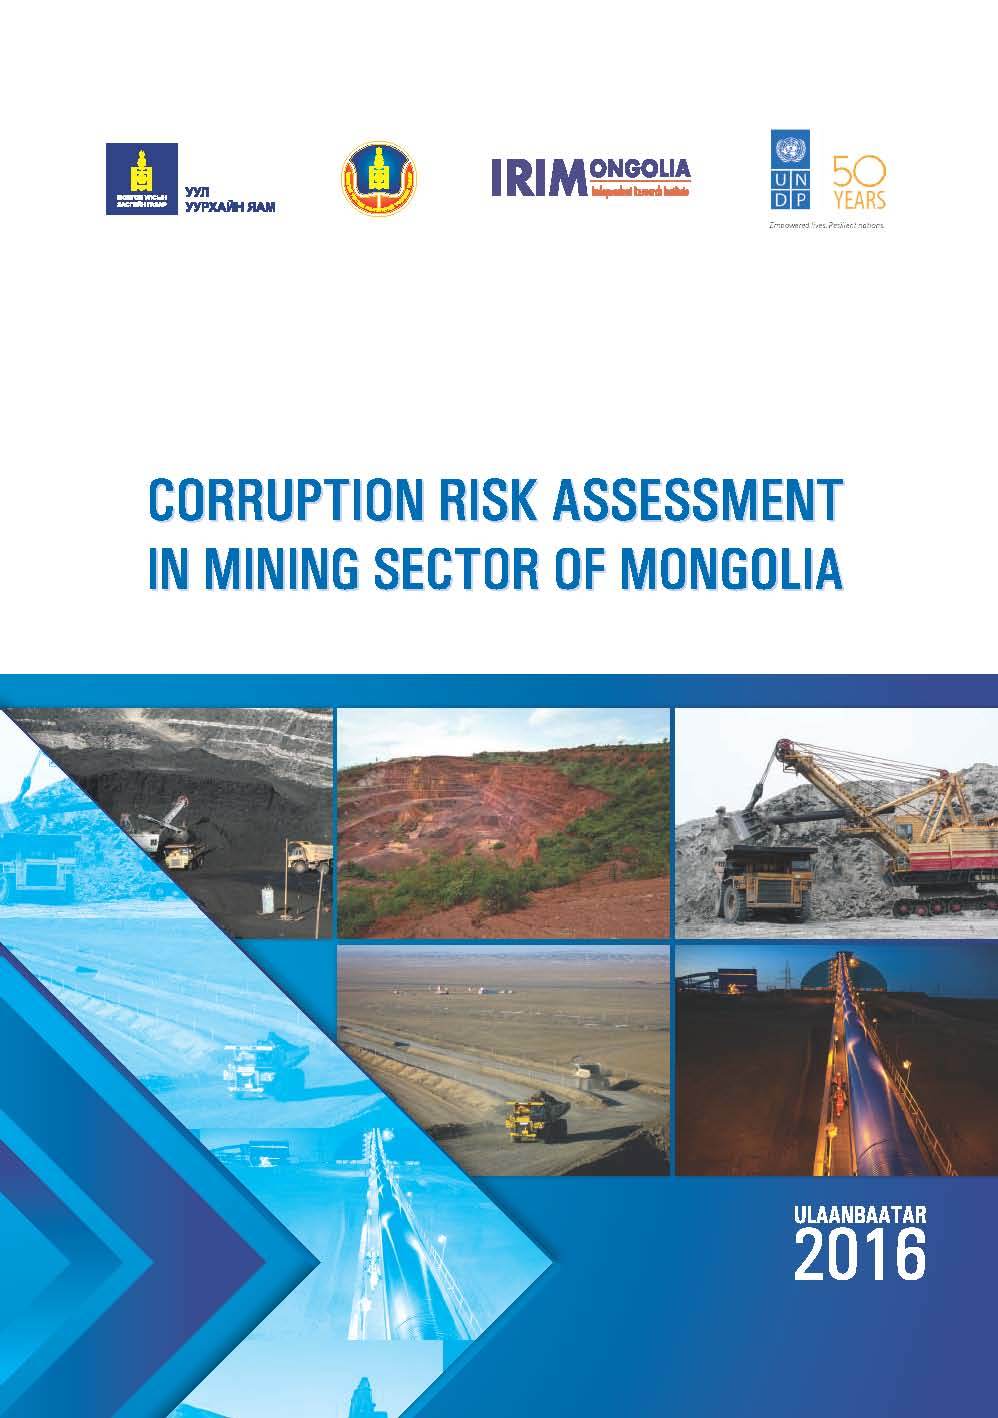 Corruption risk assessment in mining sector of Mongolia